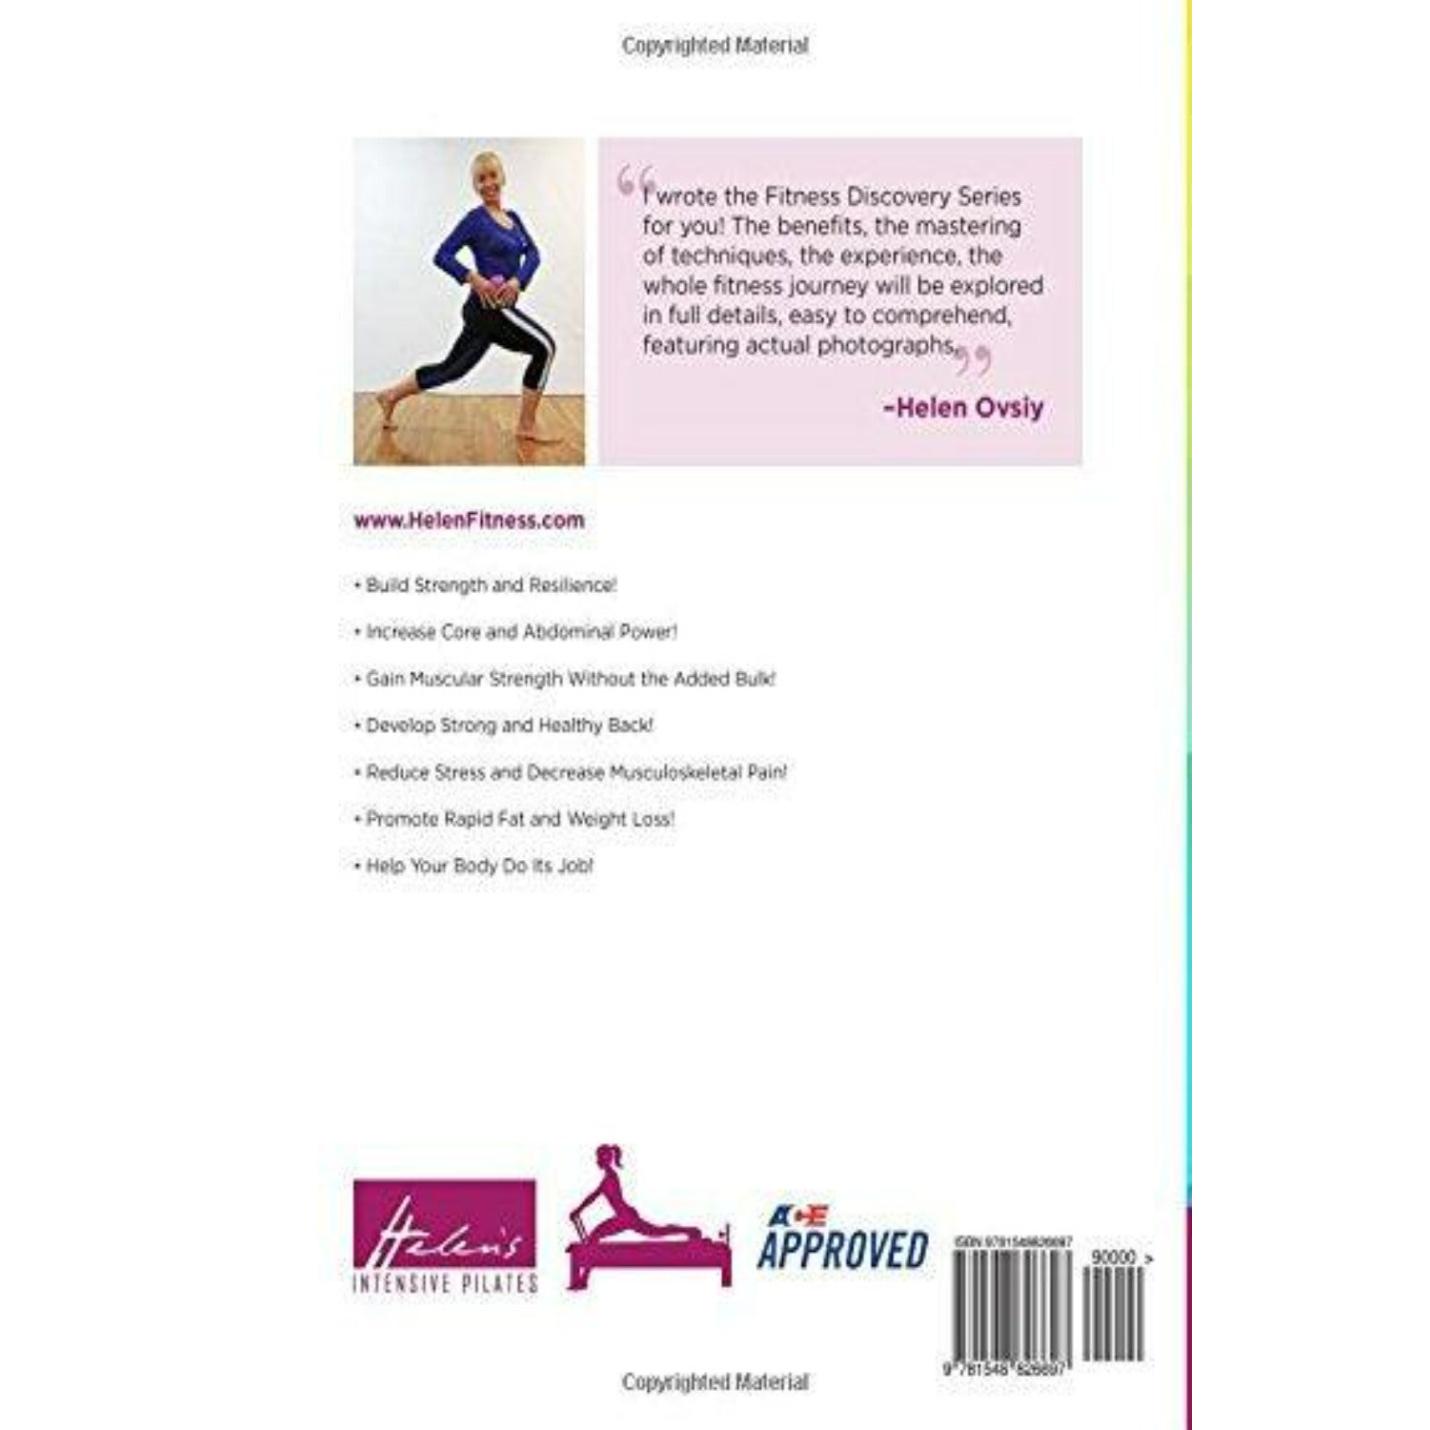 Fitness Discovery Series - Kettlebell Yoga Fusion Manual by Helen